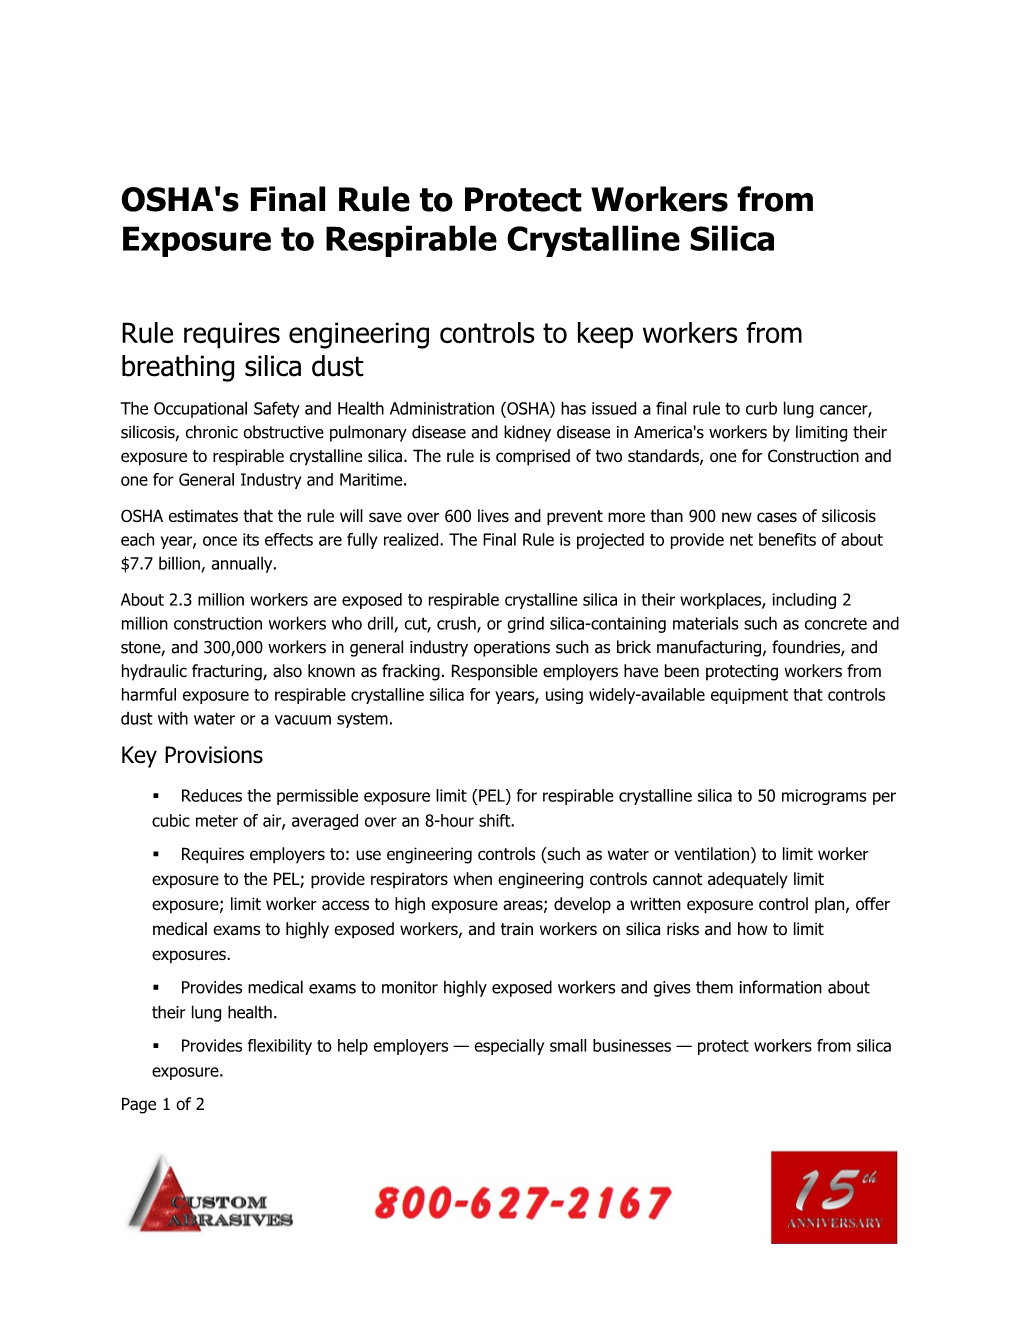 OSHA's Final Rule to Protect Workers from Exposure to Respirable Crystalline Silica